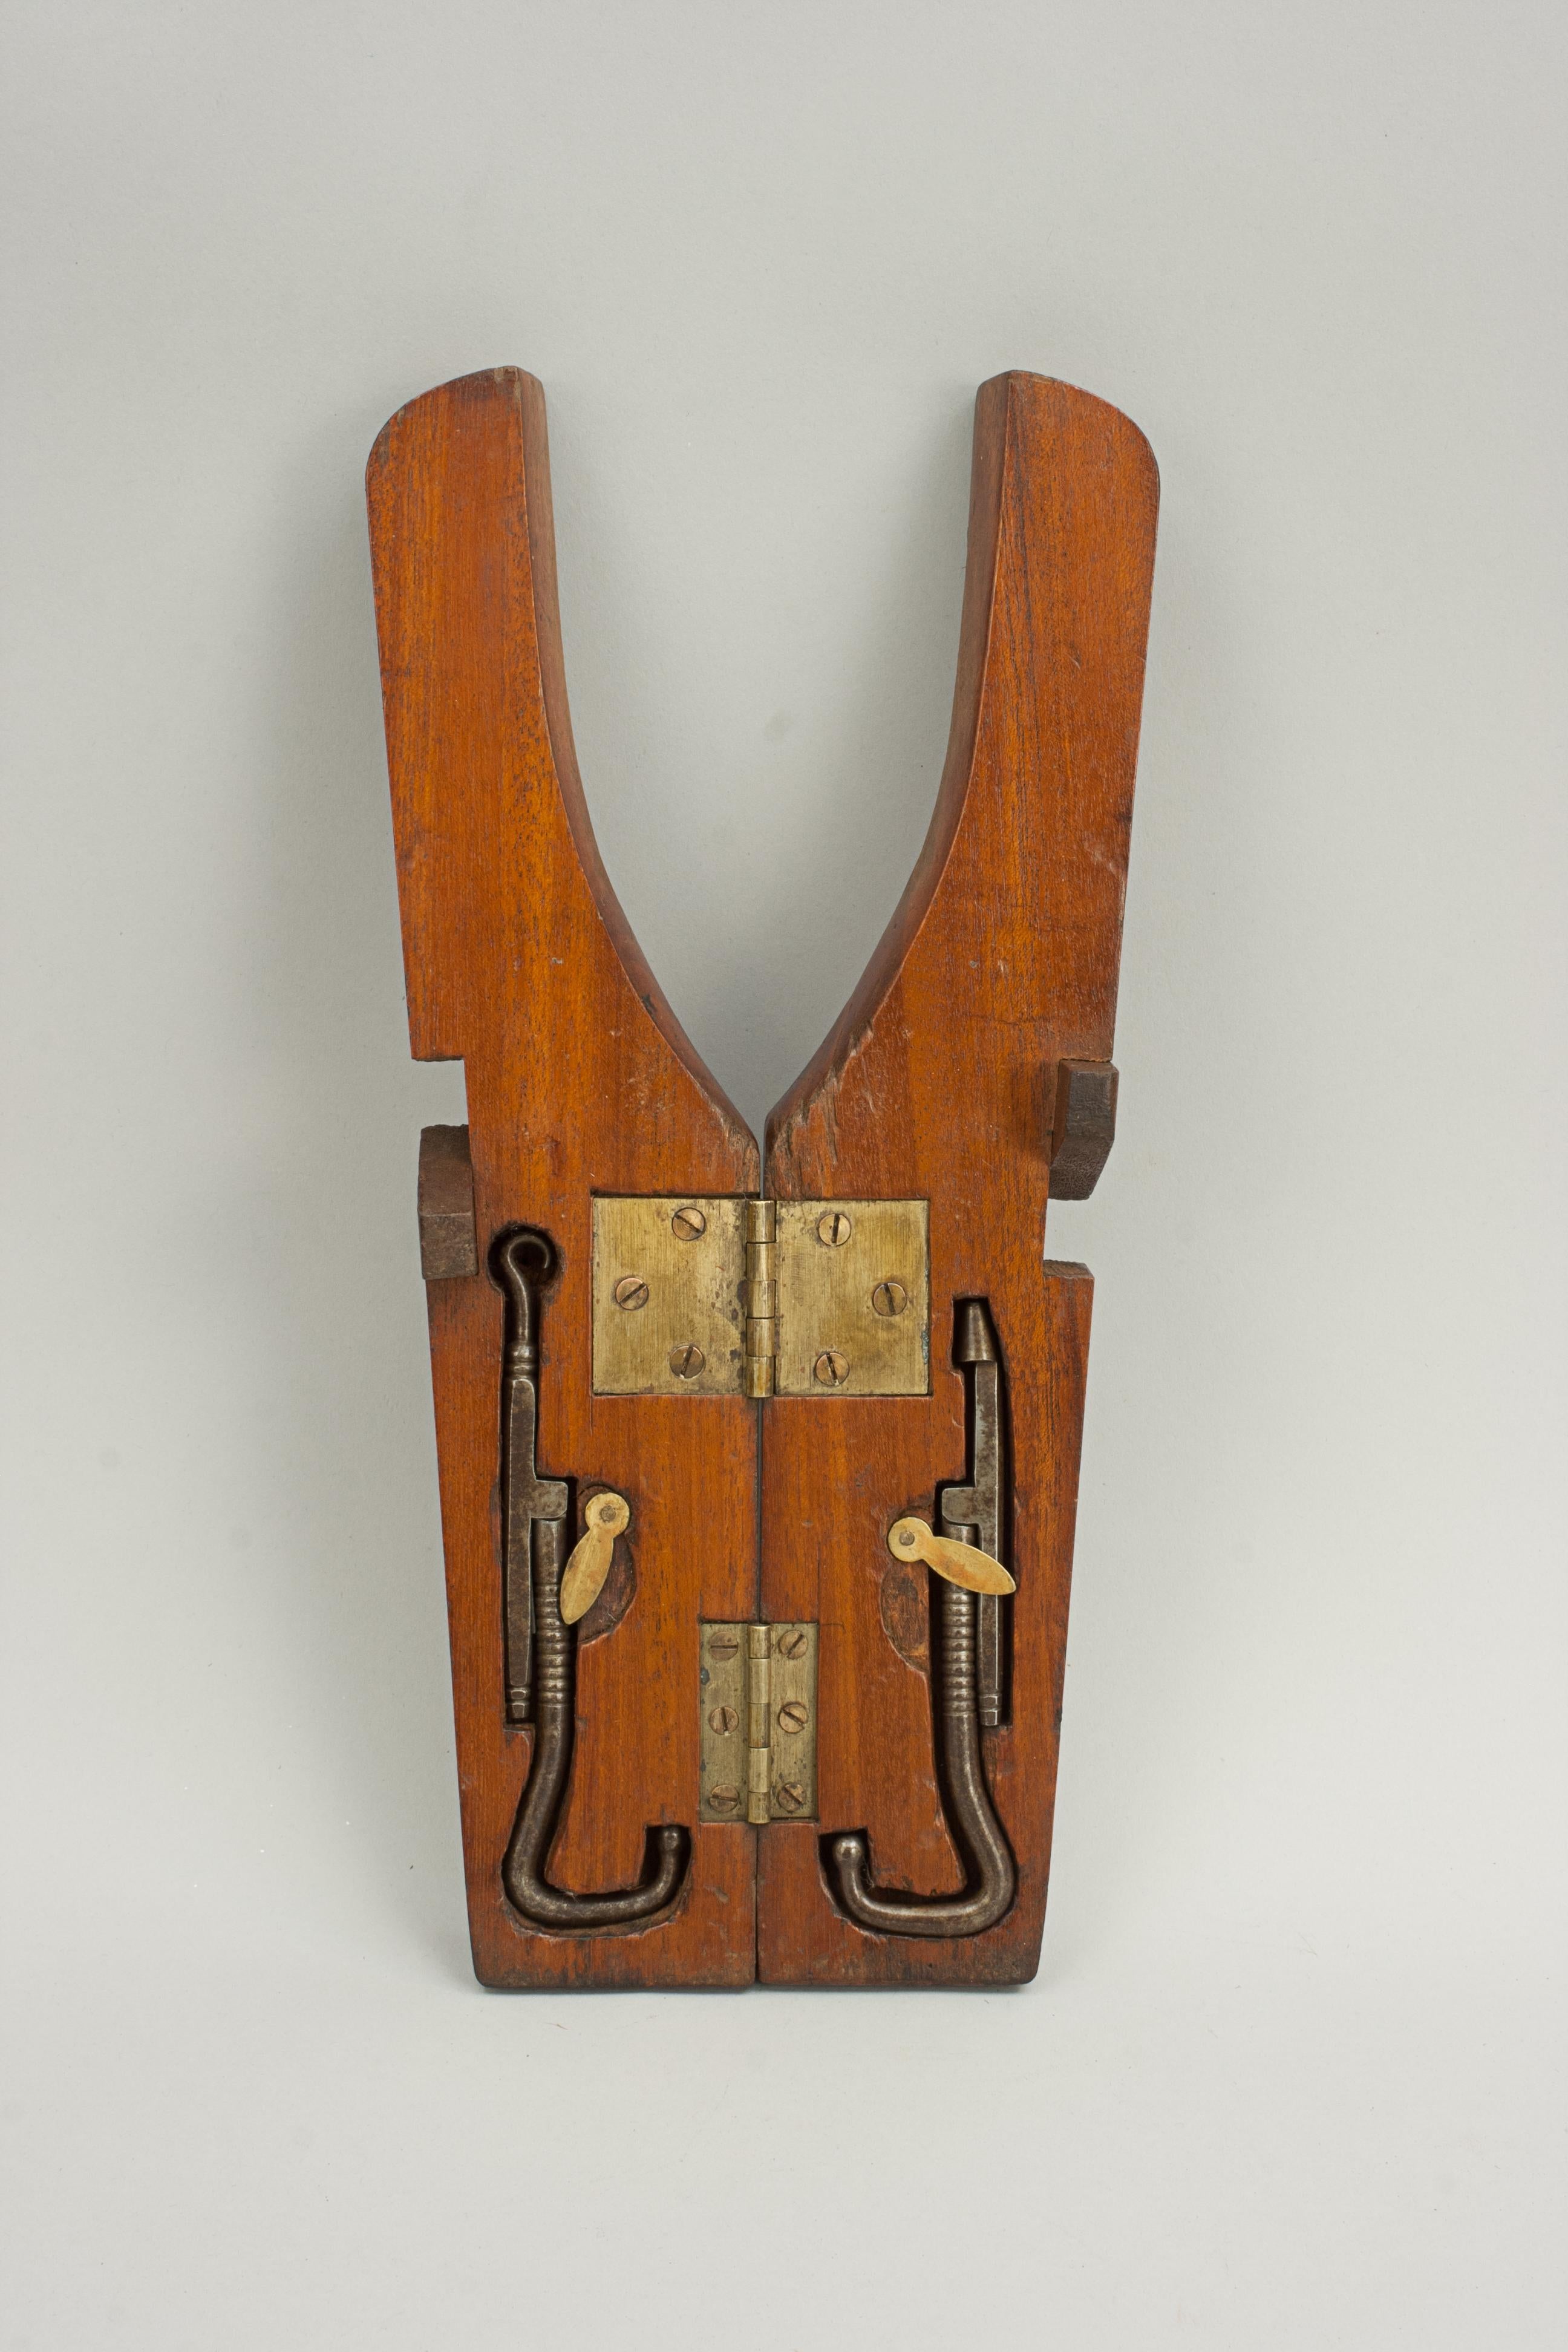 Victorian Folding Boot Jack.
A useful folding portable, campaign boot jack with boot pulls. The boot jack is made to a fairly standard design and the sort that could easily have been purchased from the Army & Navy stores. The mahogany boot jack has